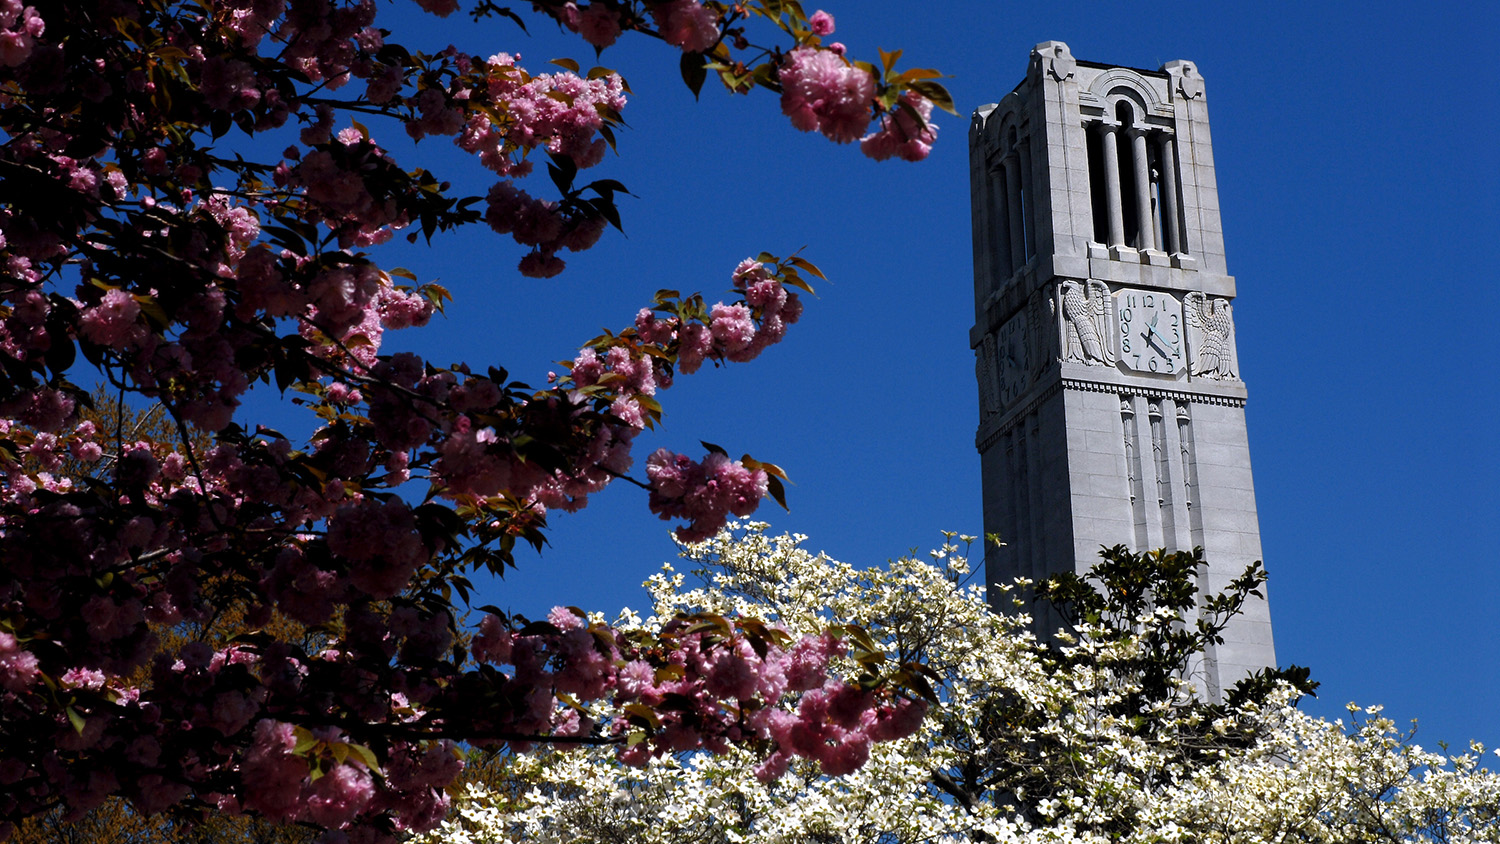 NC&#160;State belltower stands, surrounded by blooms of spring